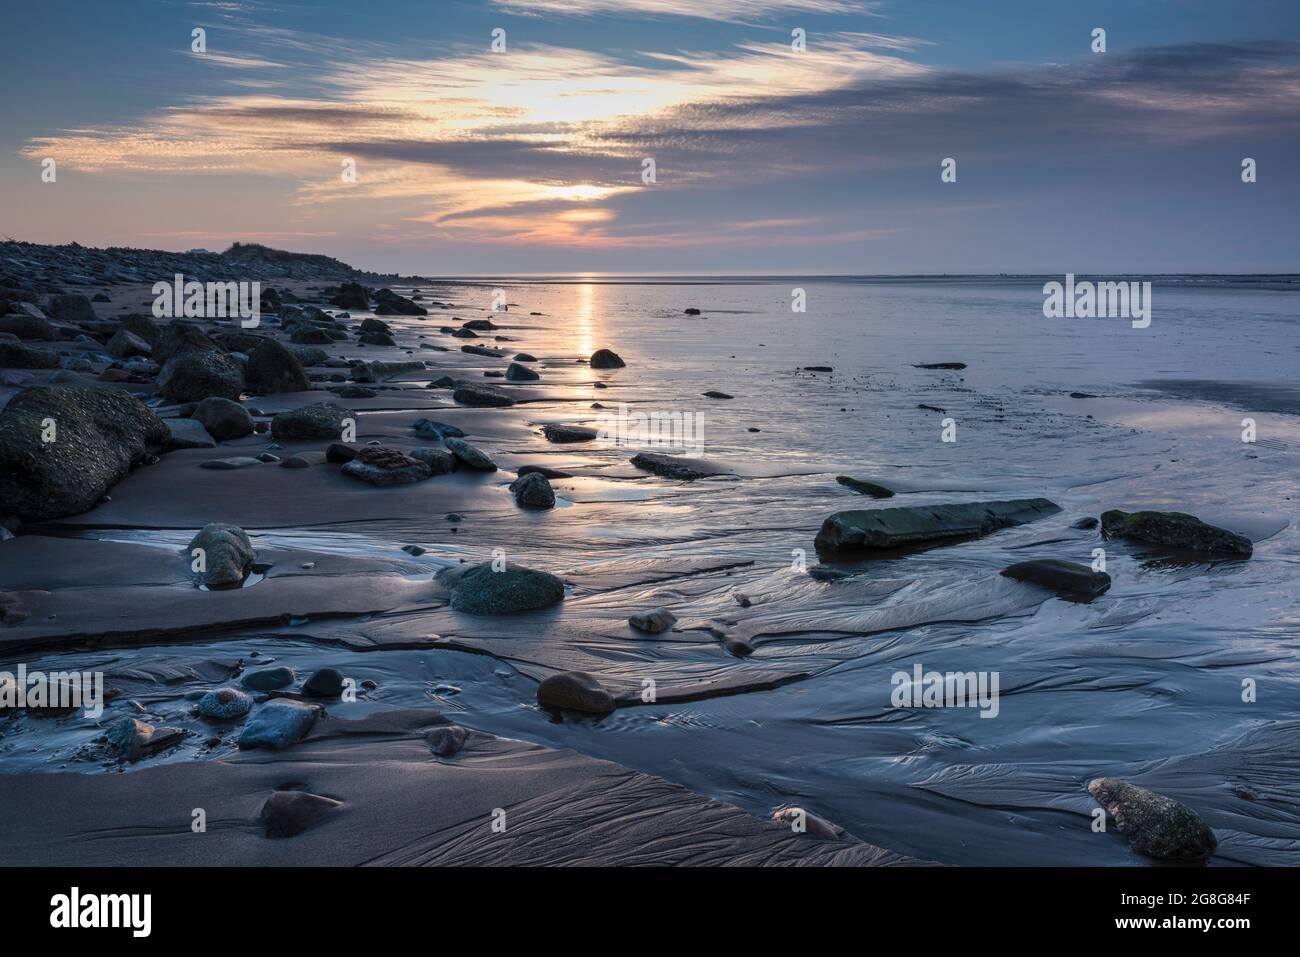 Sun setting over the Solway Firth coast, with reflections on the sand and rocks during a receding tide. Near Allonby, northwest Cumbria, England Stock Photo